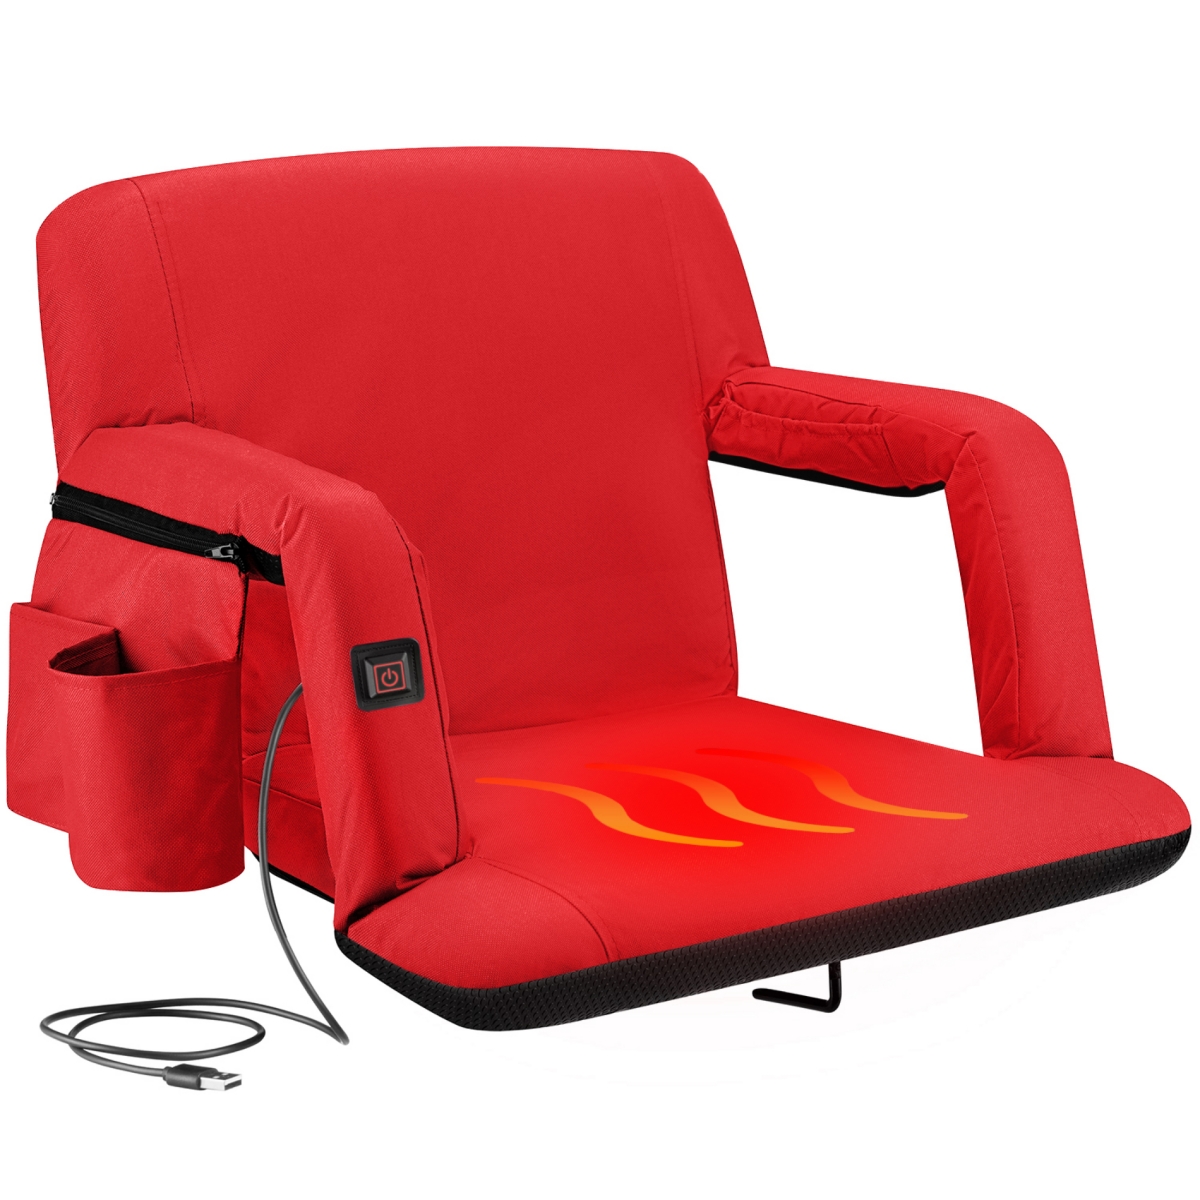 Heated Reclining Stadium Seat - Waterproof Foldable Camping Chair with Extra Thick Padding and Wide Back Support - Orange